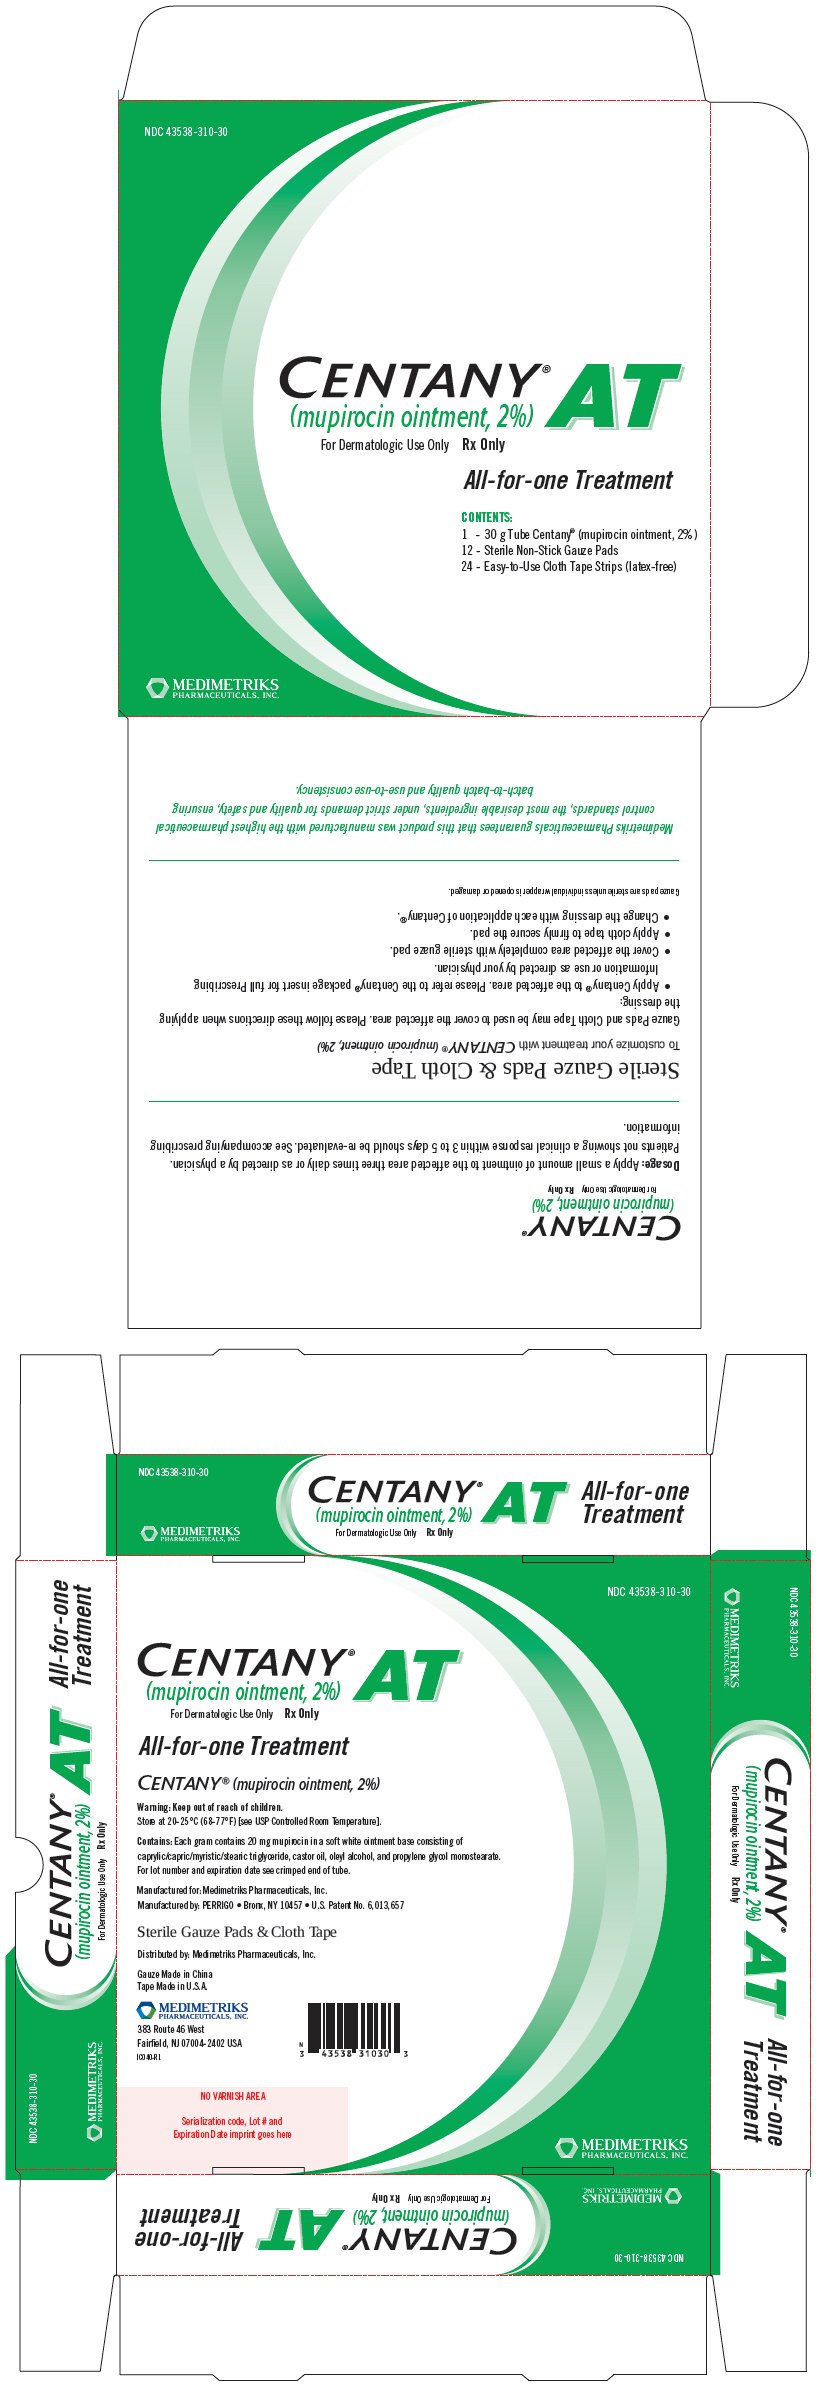 Centany AT - FDA prescribing information, side effects and uses